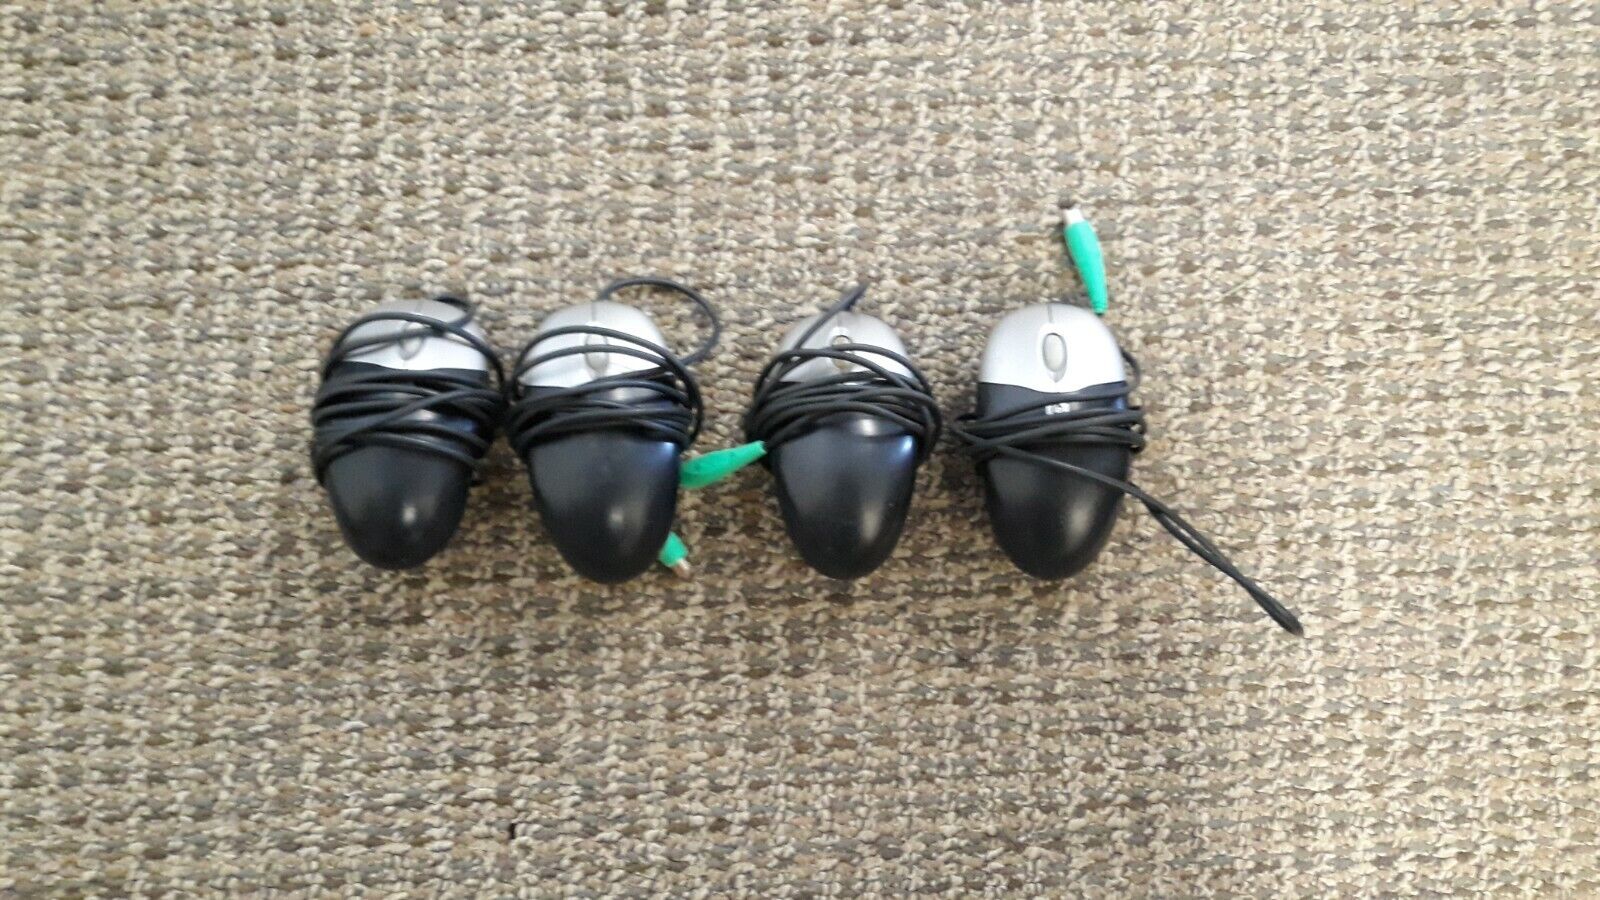 Lot of 4 PS/2 HP wired mice, Used, Black and Silver